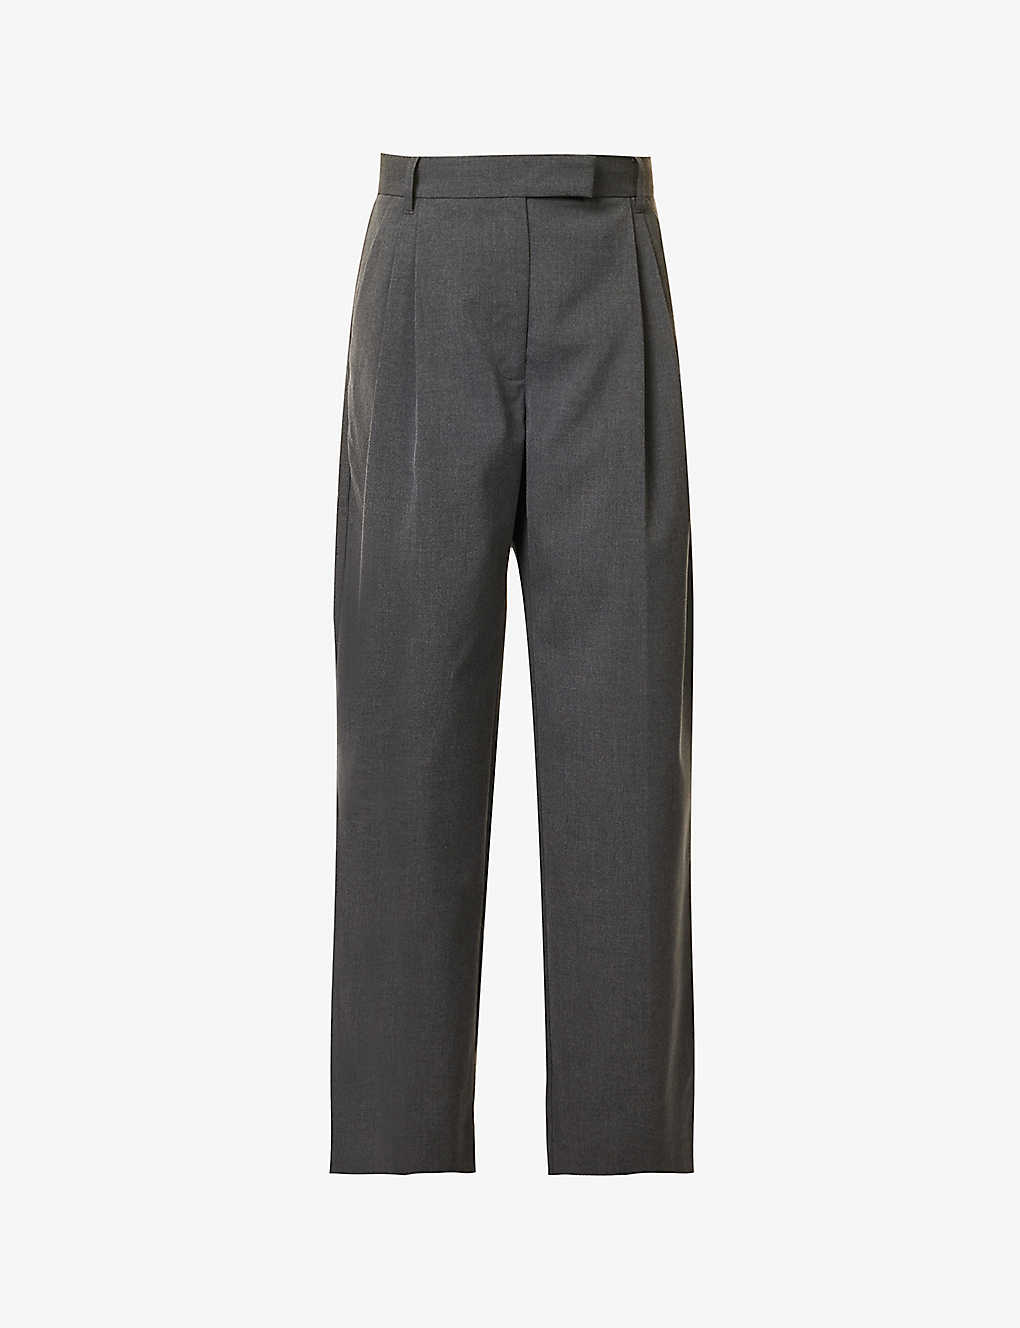 CAMILLA AND MARC CAMILLA AND MARC WOMEN'S CHARCOAL MARLE ORLA STRAIGHT-LEG MID-RISE STRETCH-WOVEN TROUSERS,68153206